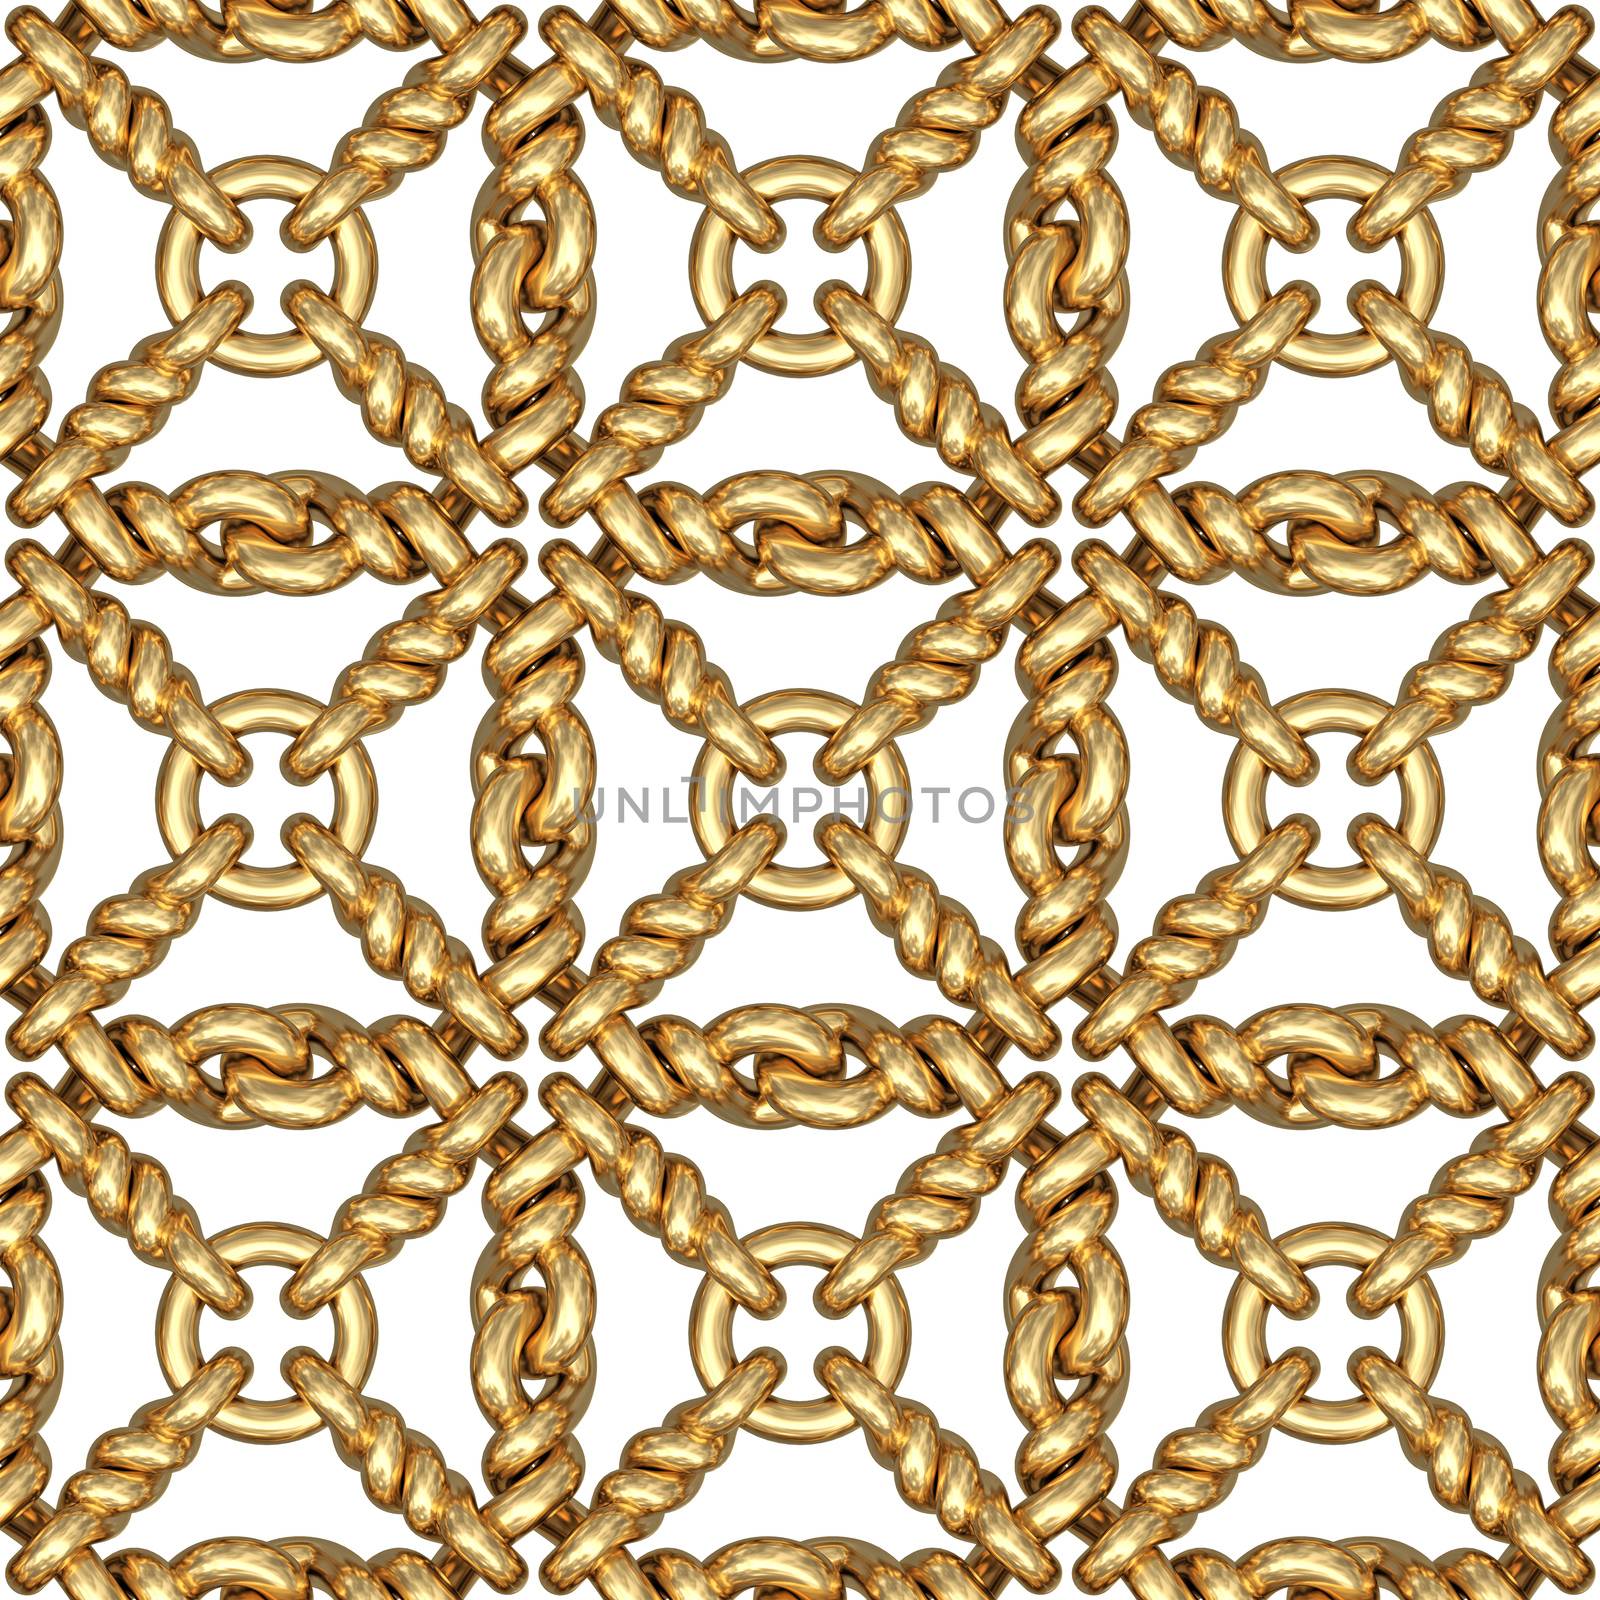 Seamless pattern of gold wire mesh or fence on white background. High resolution 3D image